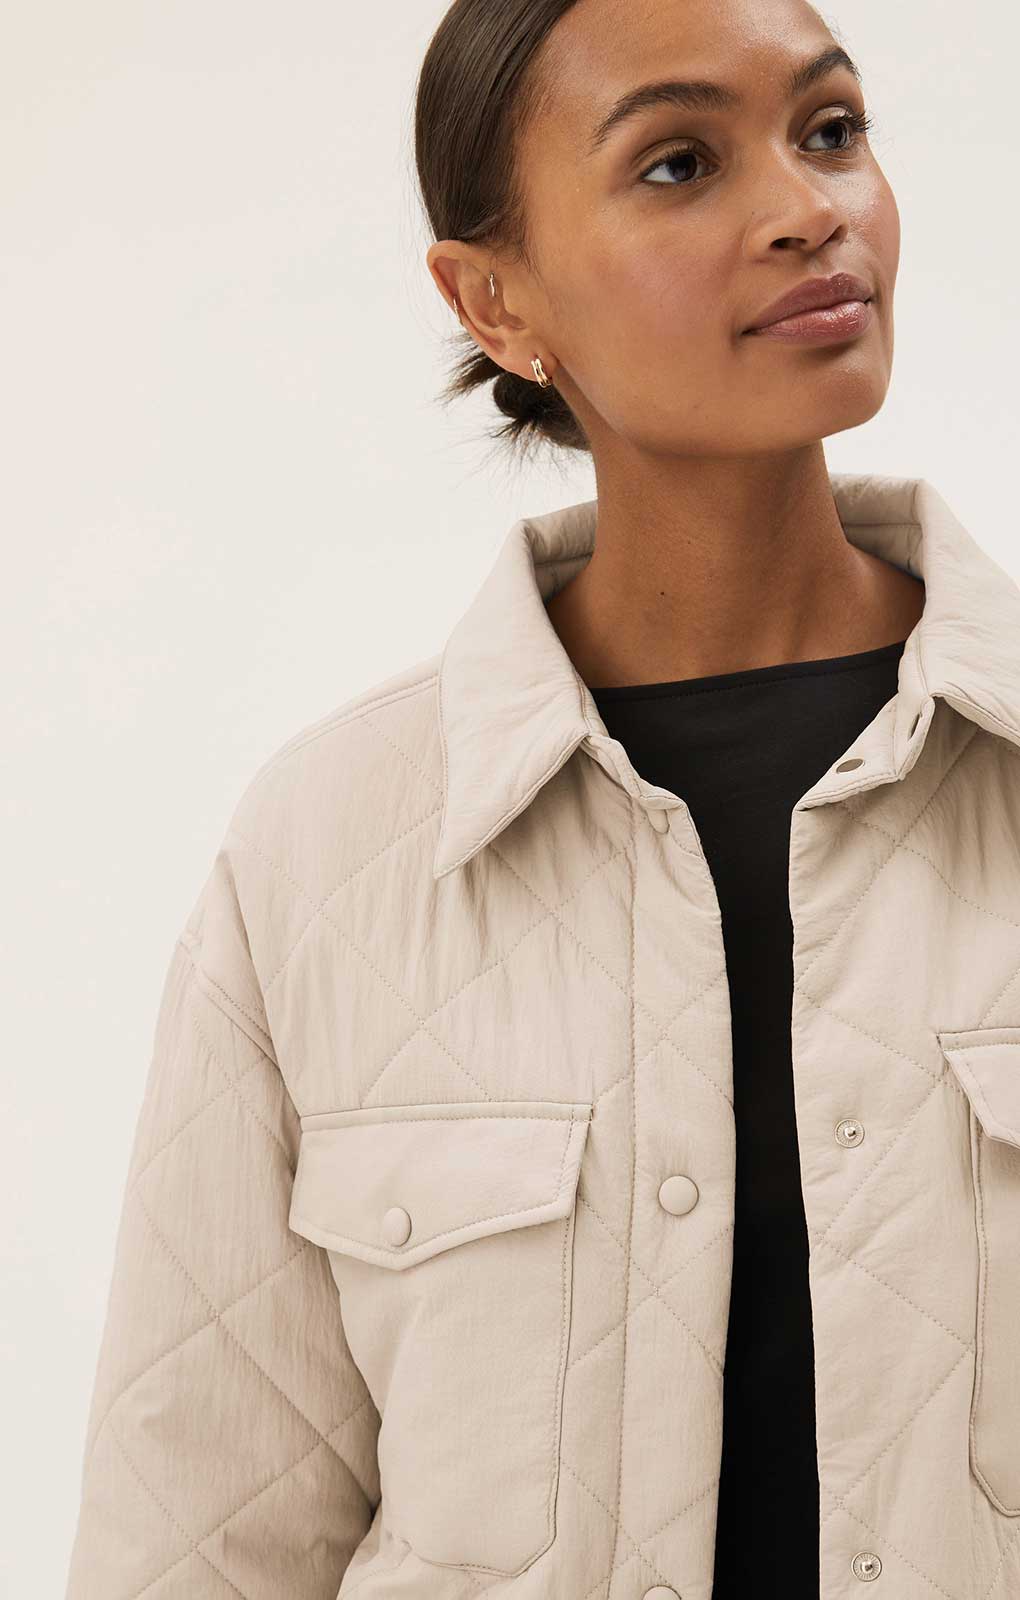 M&S Fawn Textured Quilted Collared Shacket product image